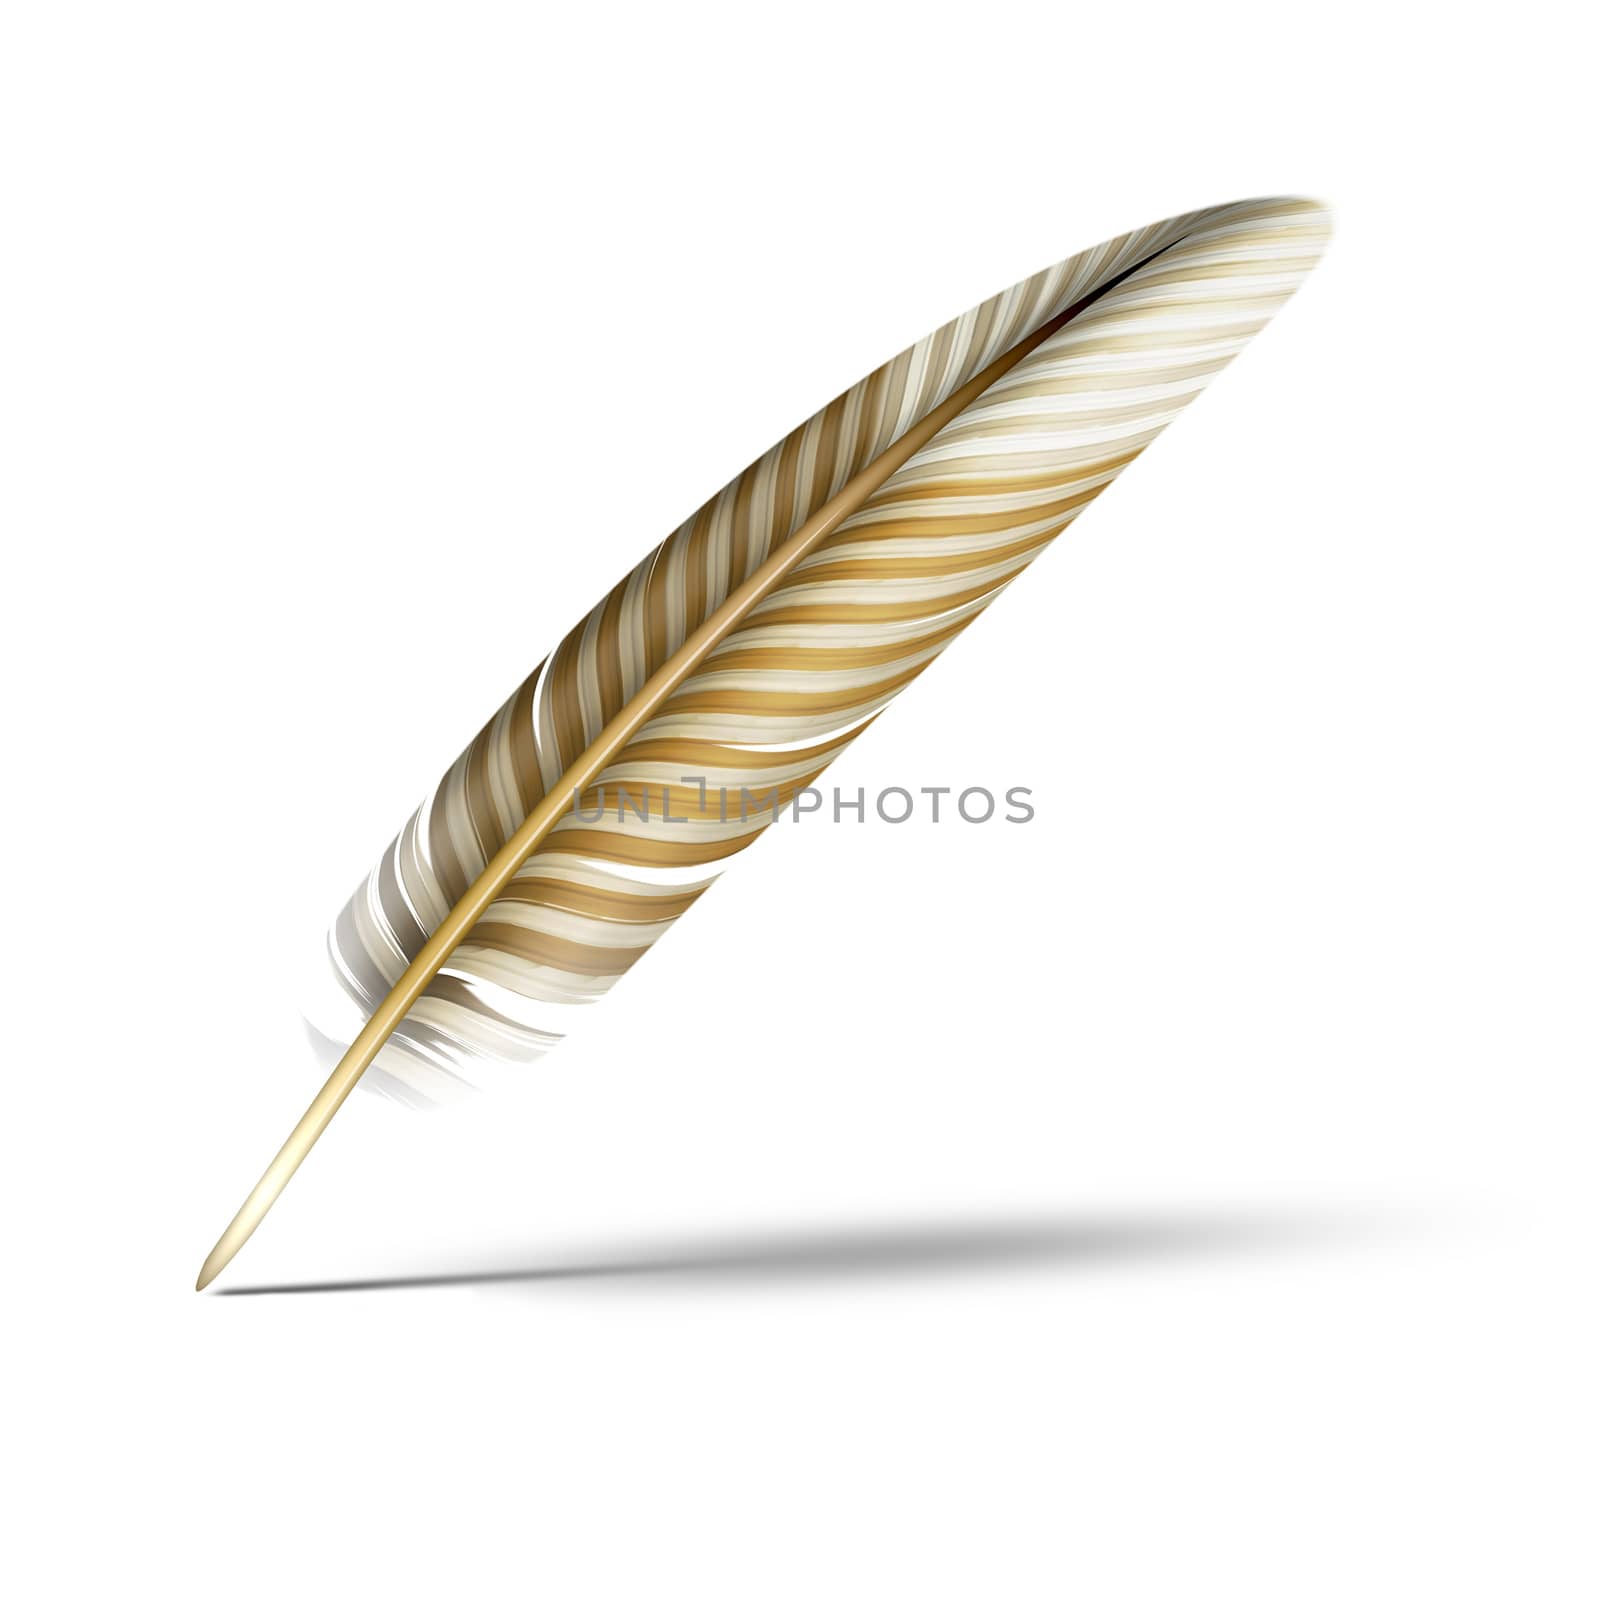 An illustration of a beautiful feather with shadow on white